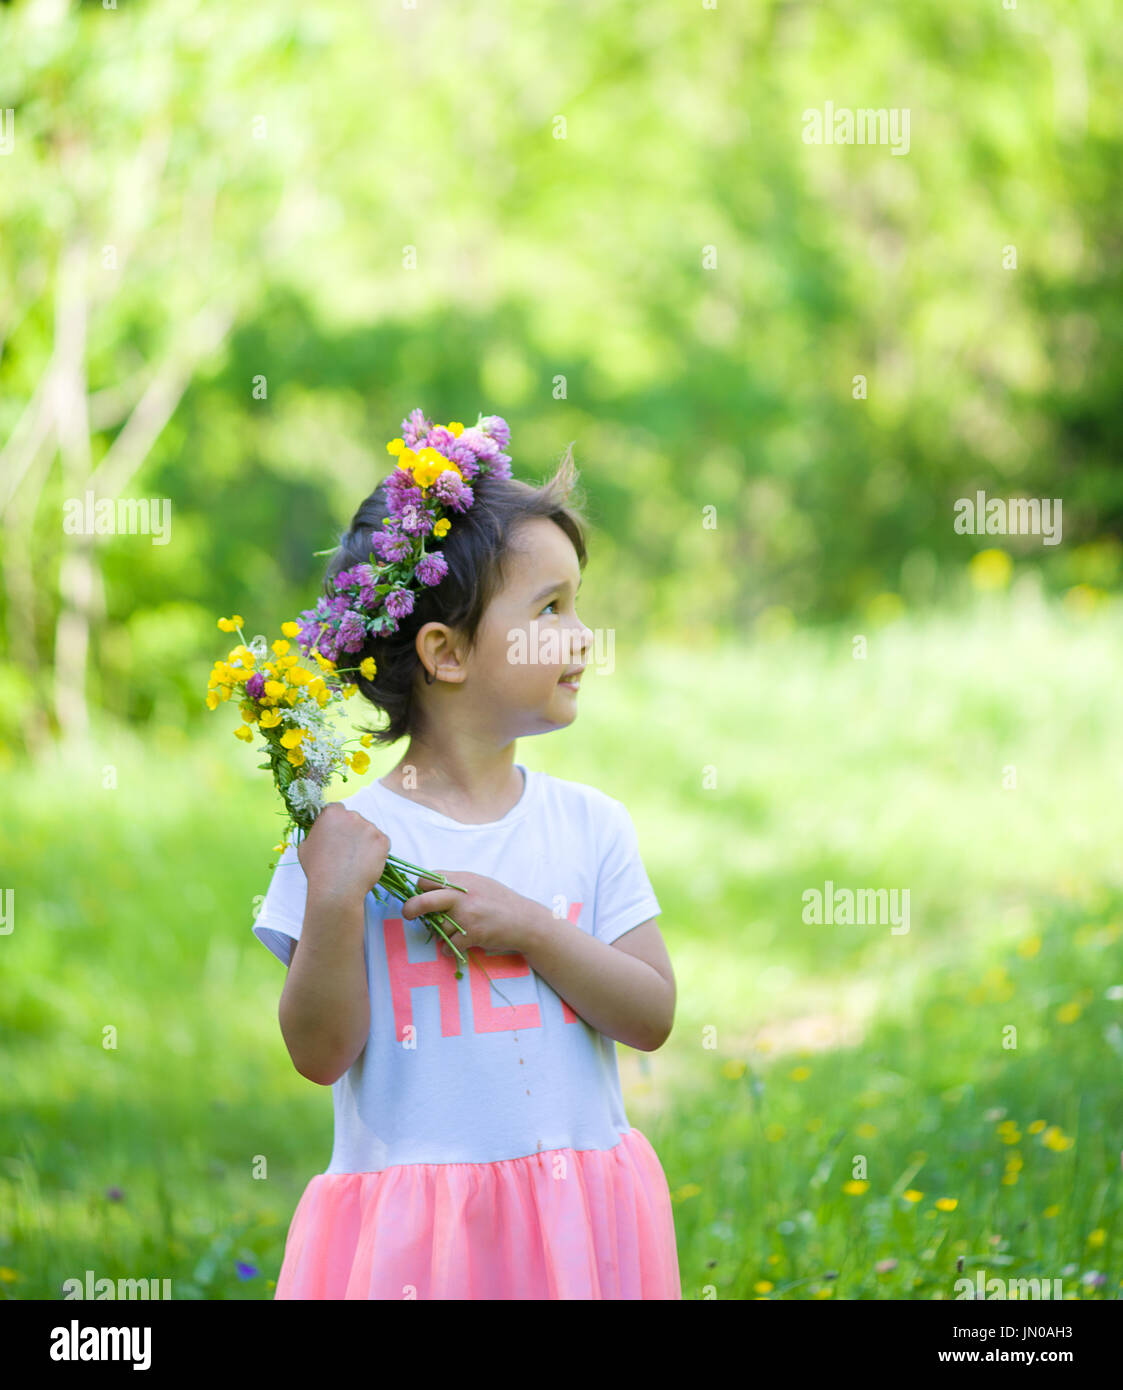 Portrait of a cheerful girl with a wreath of flowers on her head Stock Photo